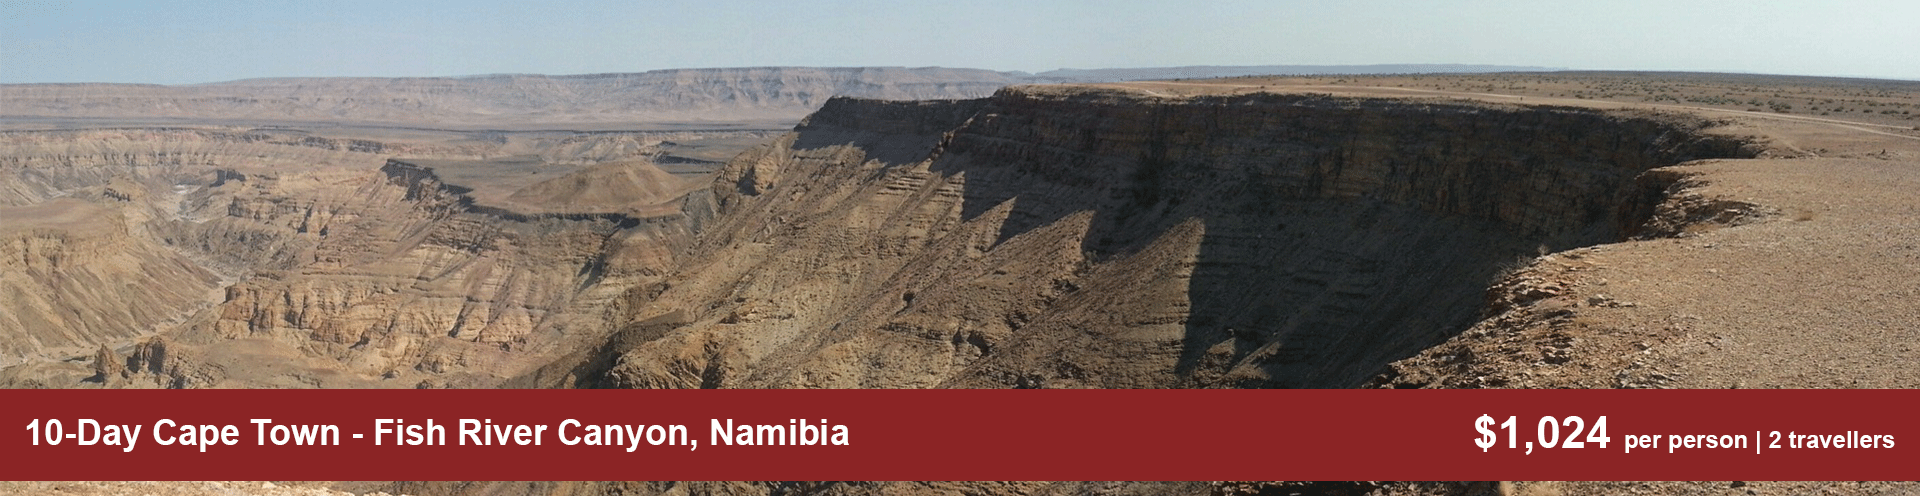 10-Day Cape Town - Fish River Canyon, Namibia